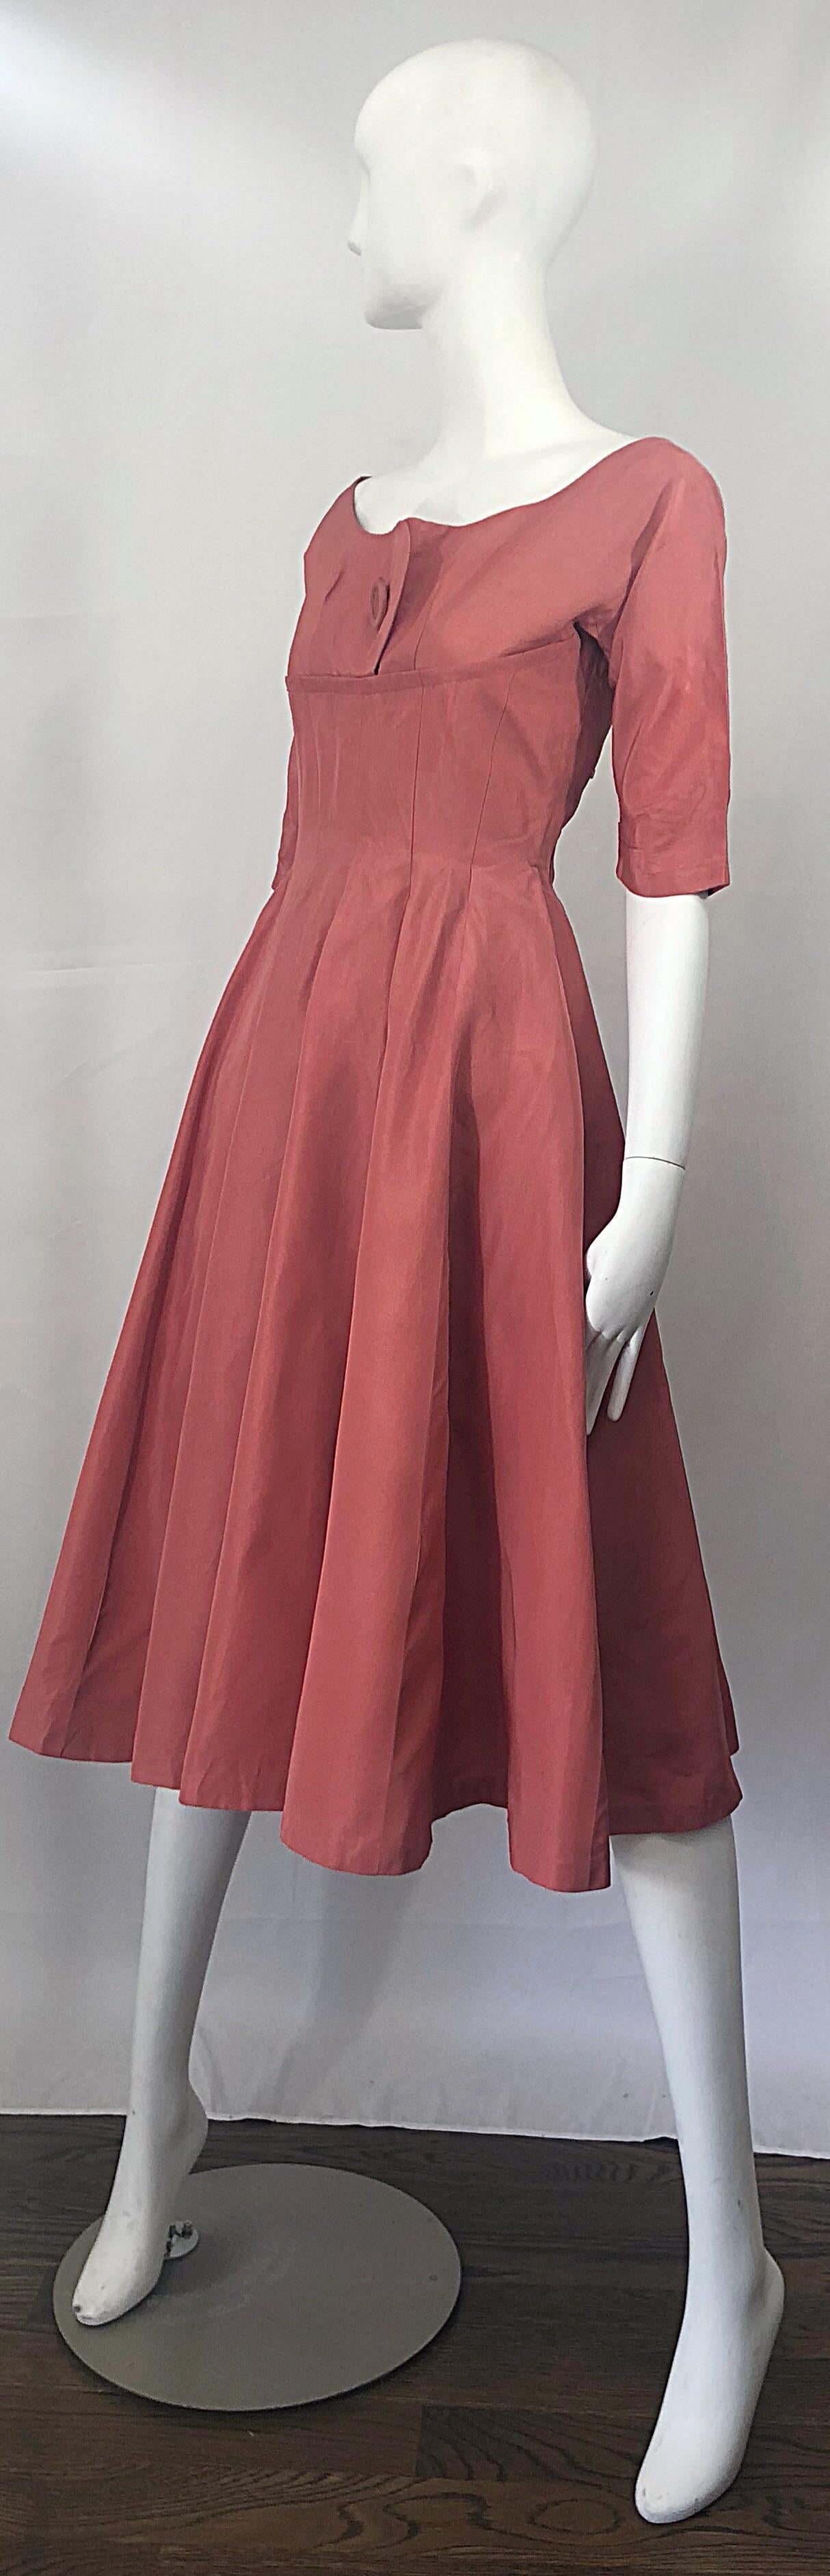 1950s Gigi Young Salmon Coral Pink Silk Taffeta Vintage 50s Fit n Flare Dress In Excellent Condition For Sale In San Diego, CA